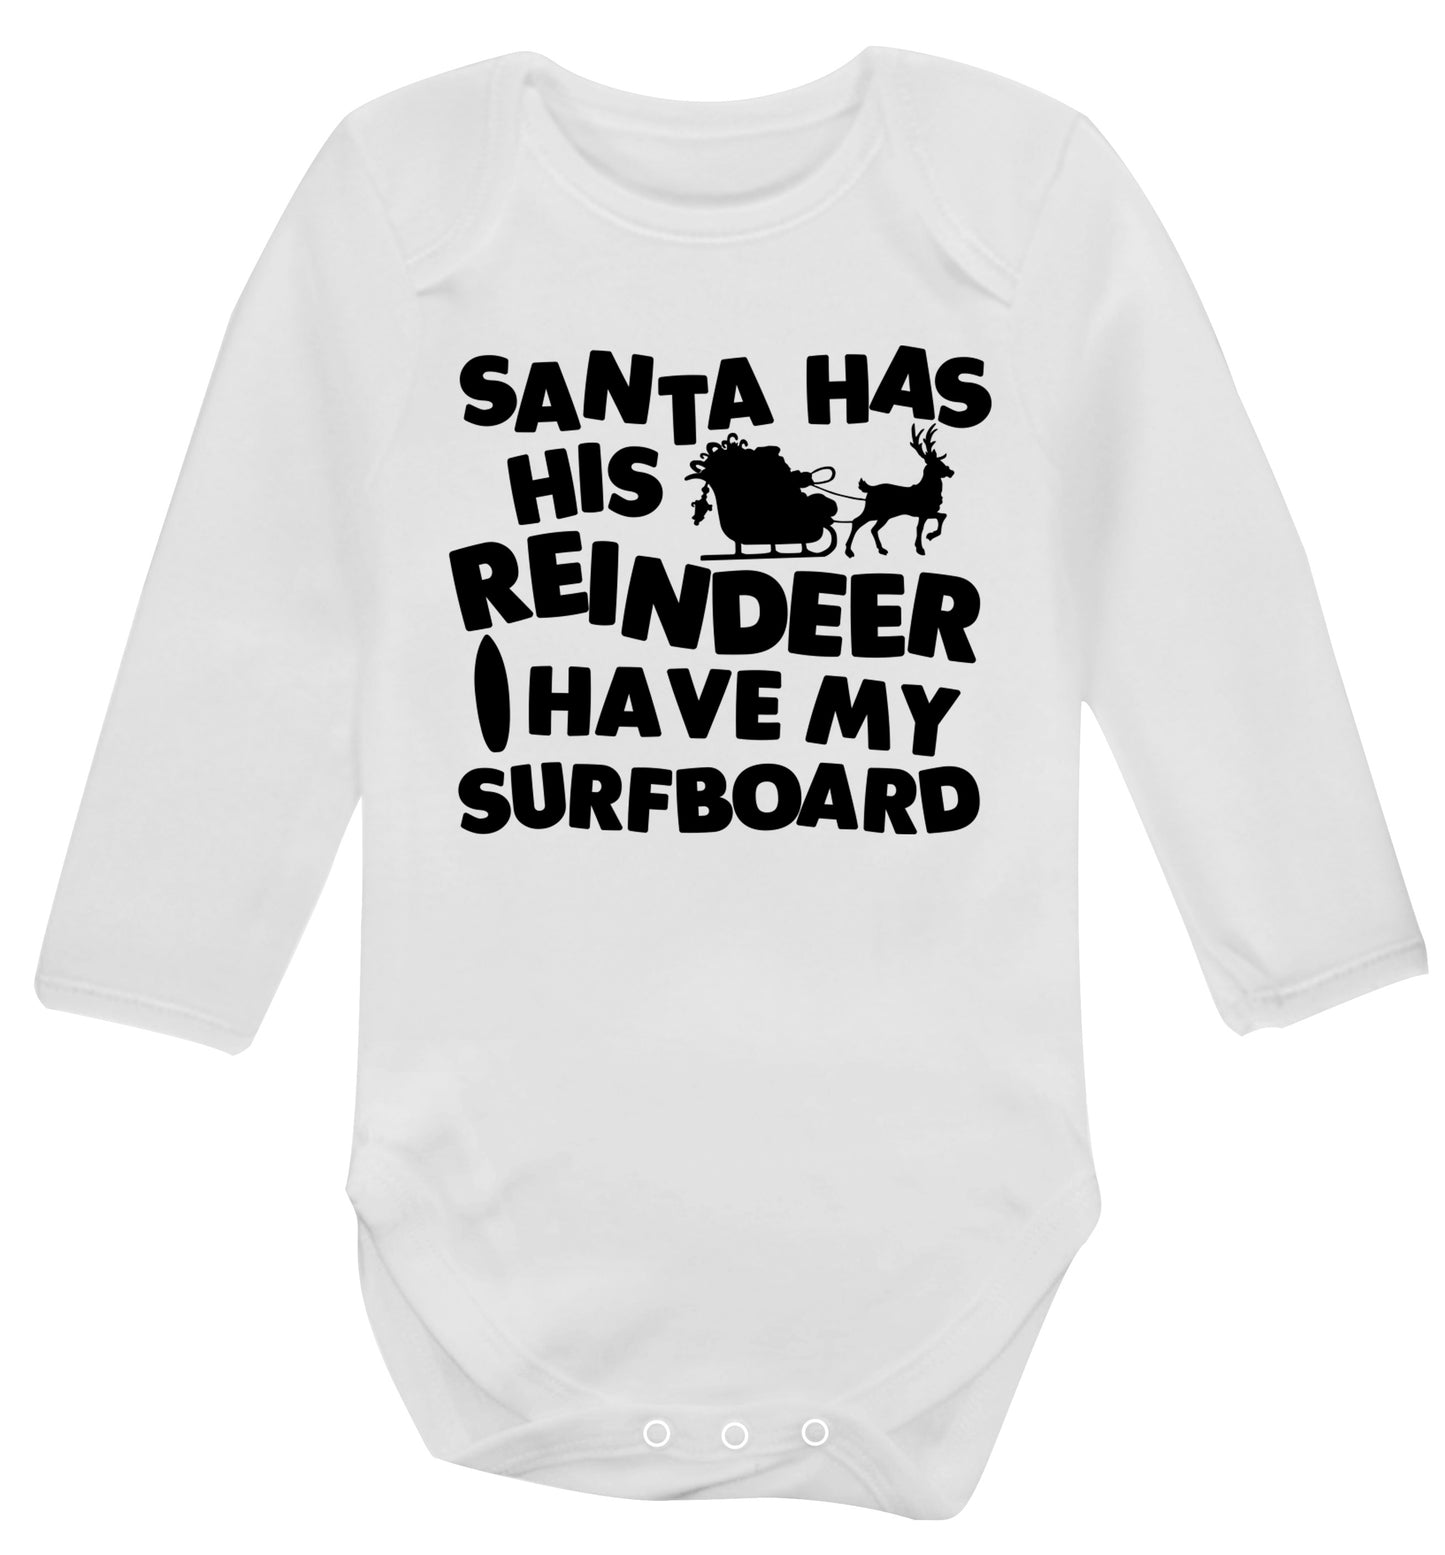 Santa has his reindeer I have my surfboard Baby Vest long sleeved white 6-12 months